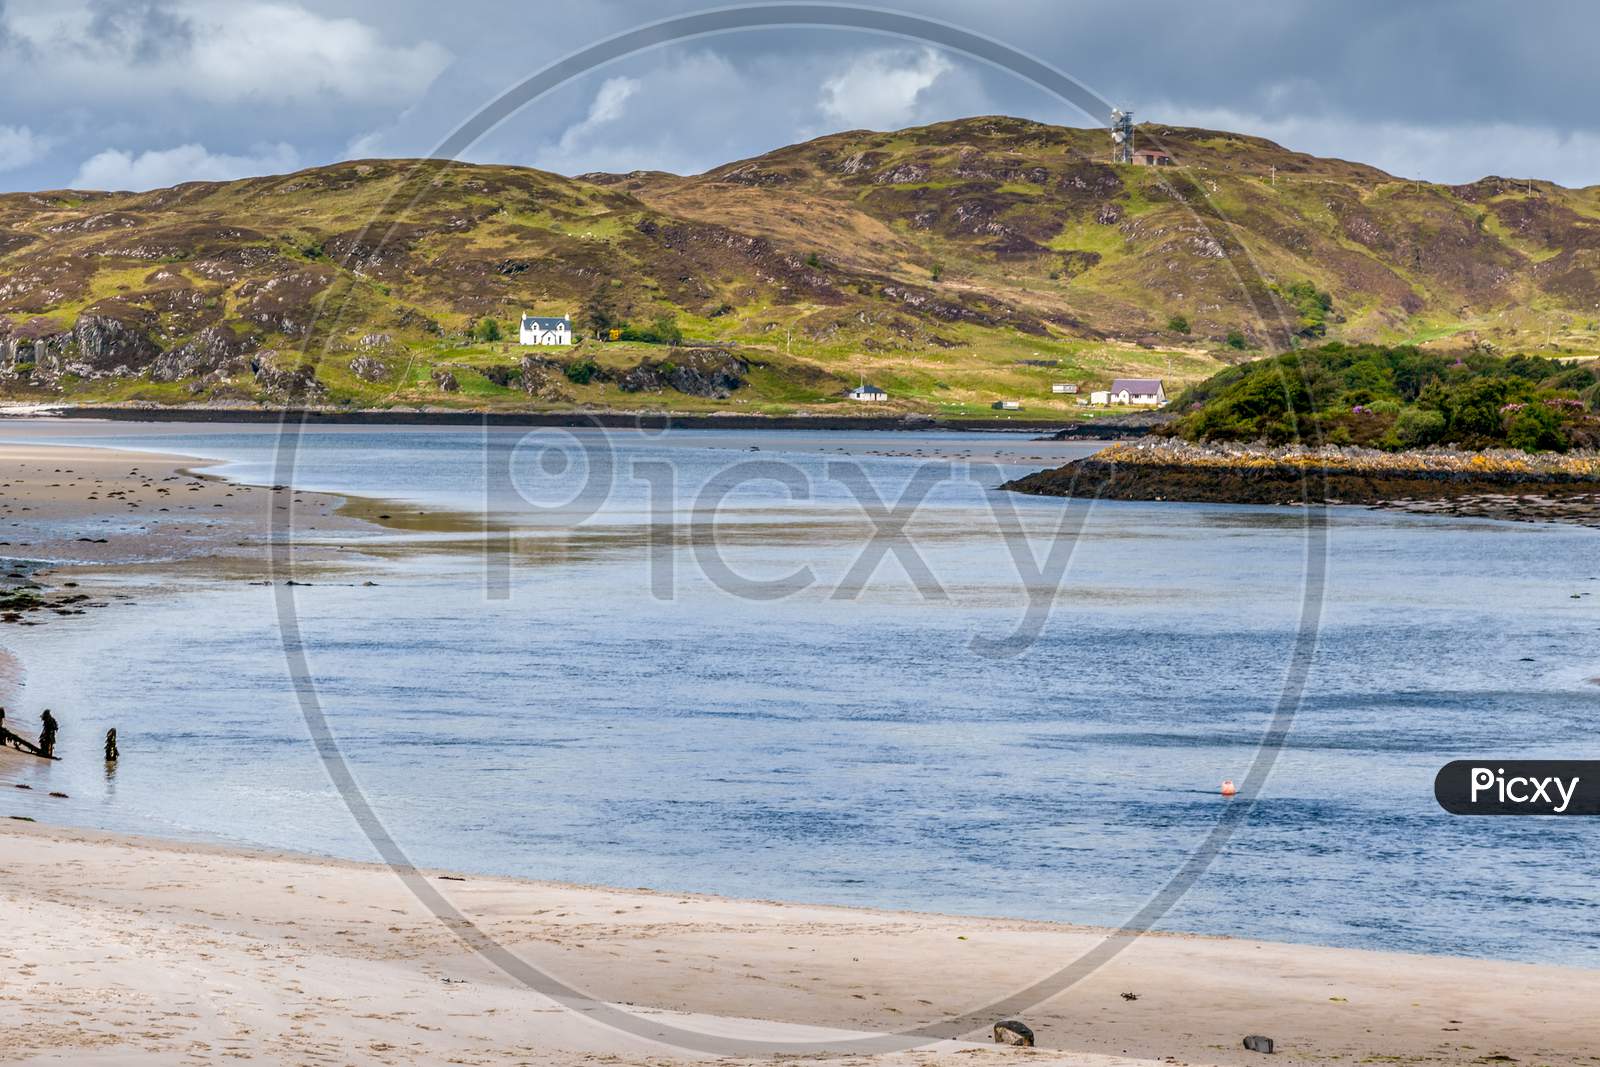 Morar Estuary, Scottish Highlands/Uk - May 19 : View Of  The Estuary Of Morar Bay In The West H.Ighlands Of Scotland On May 19, 2011